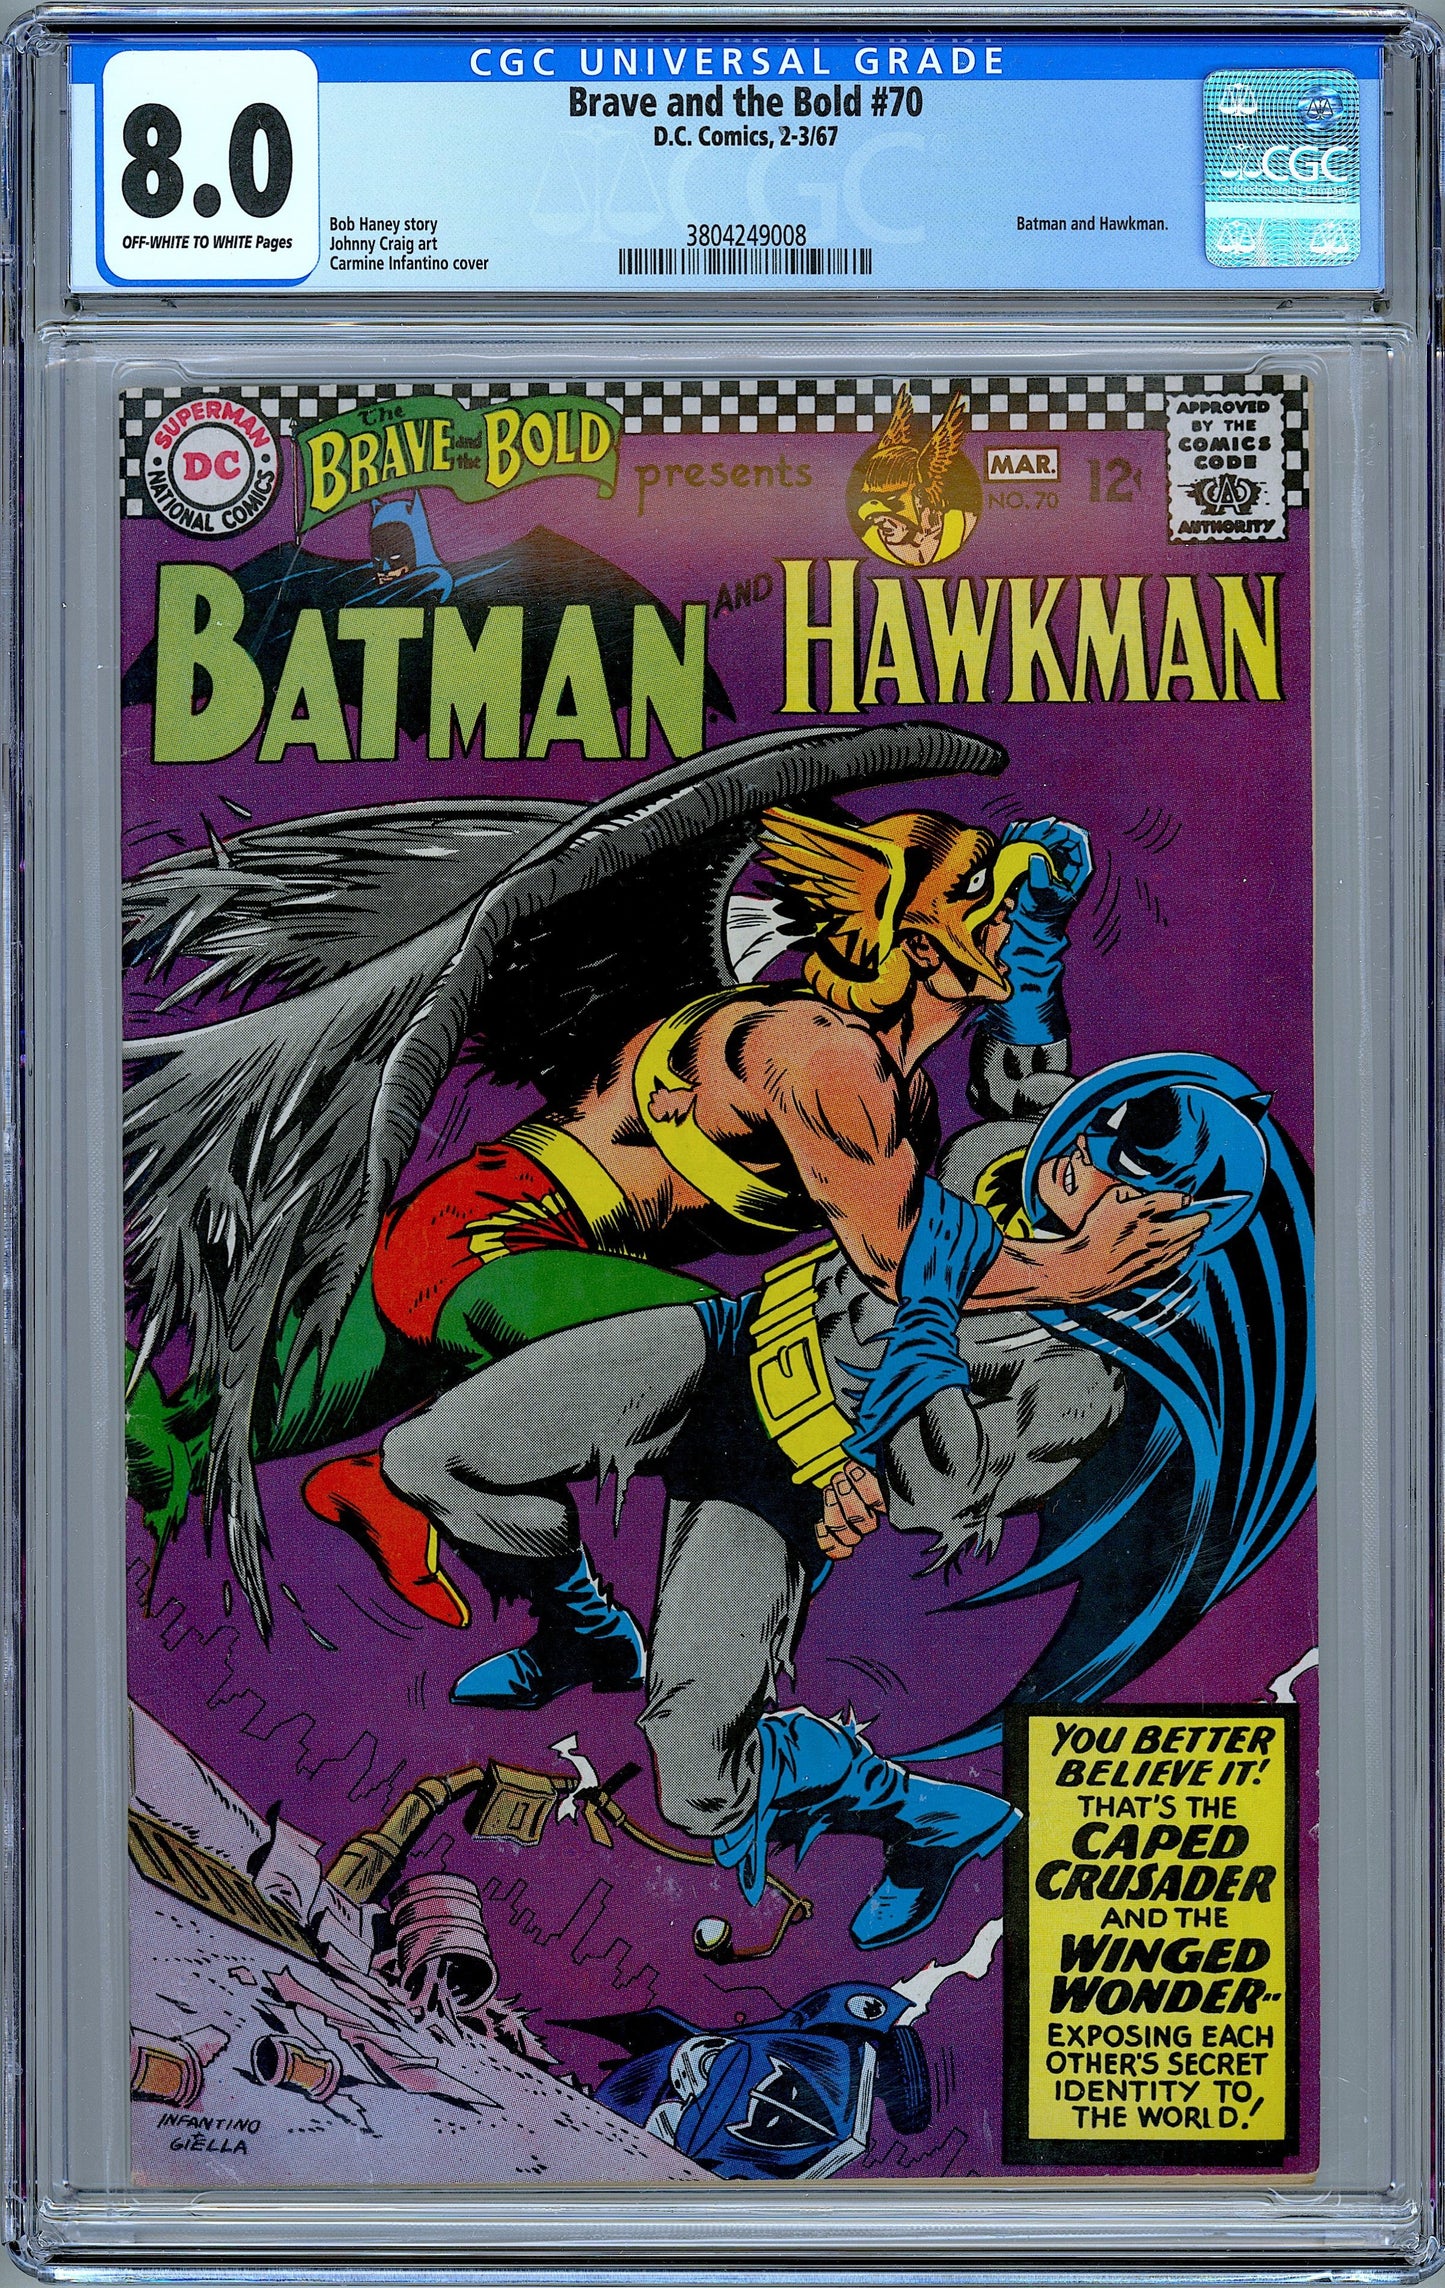 Brave and the Bold #70.  Batman and Hawkman.  CGC 8.0